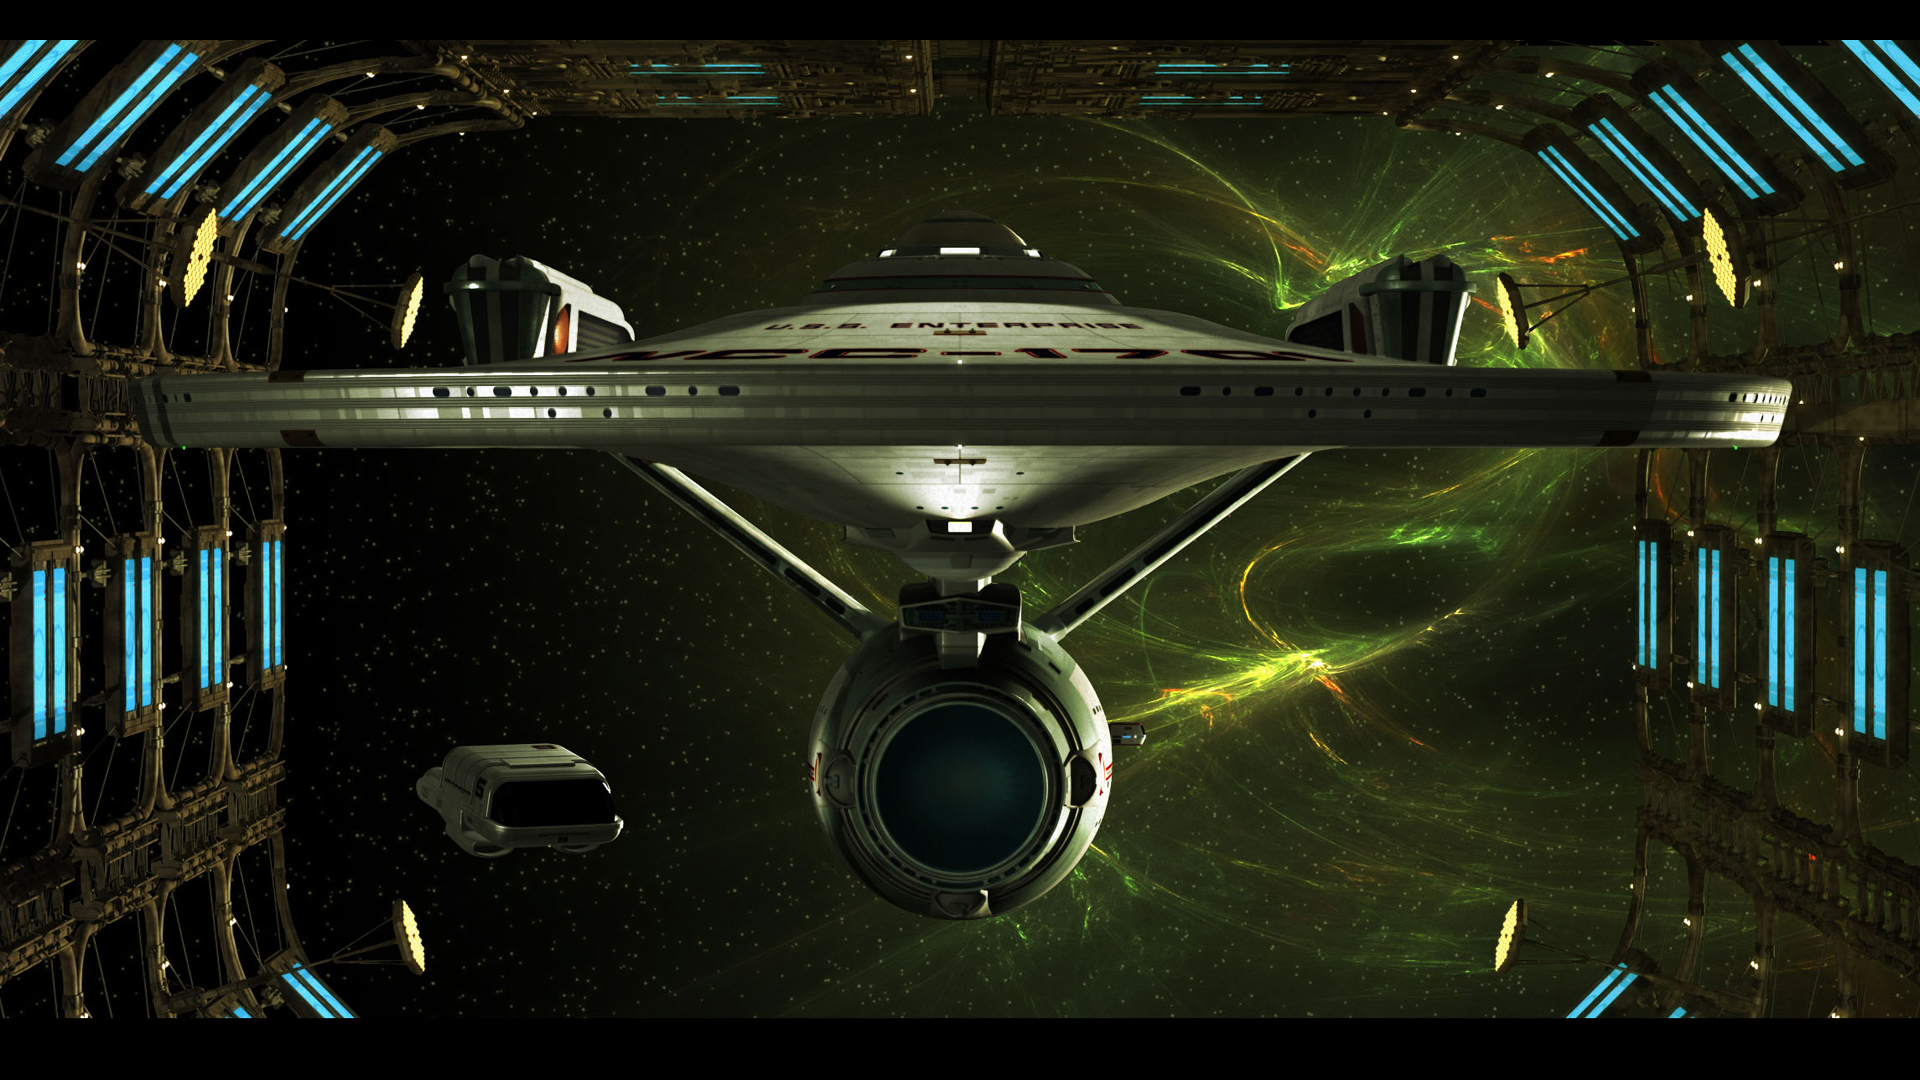 Free Download Wallpaper Abyss Explore The Collection Star Trek Sci Fi Star Trek 1920x1080 For Your Desktop Mobile Tablet Explore 47 Dual Monitor Star Trek Wallpaper Star Trek Wallpaper